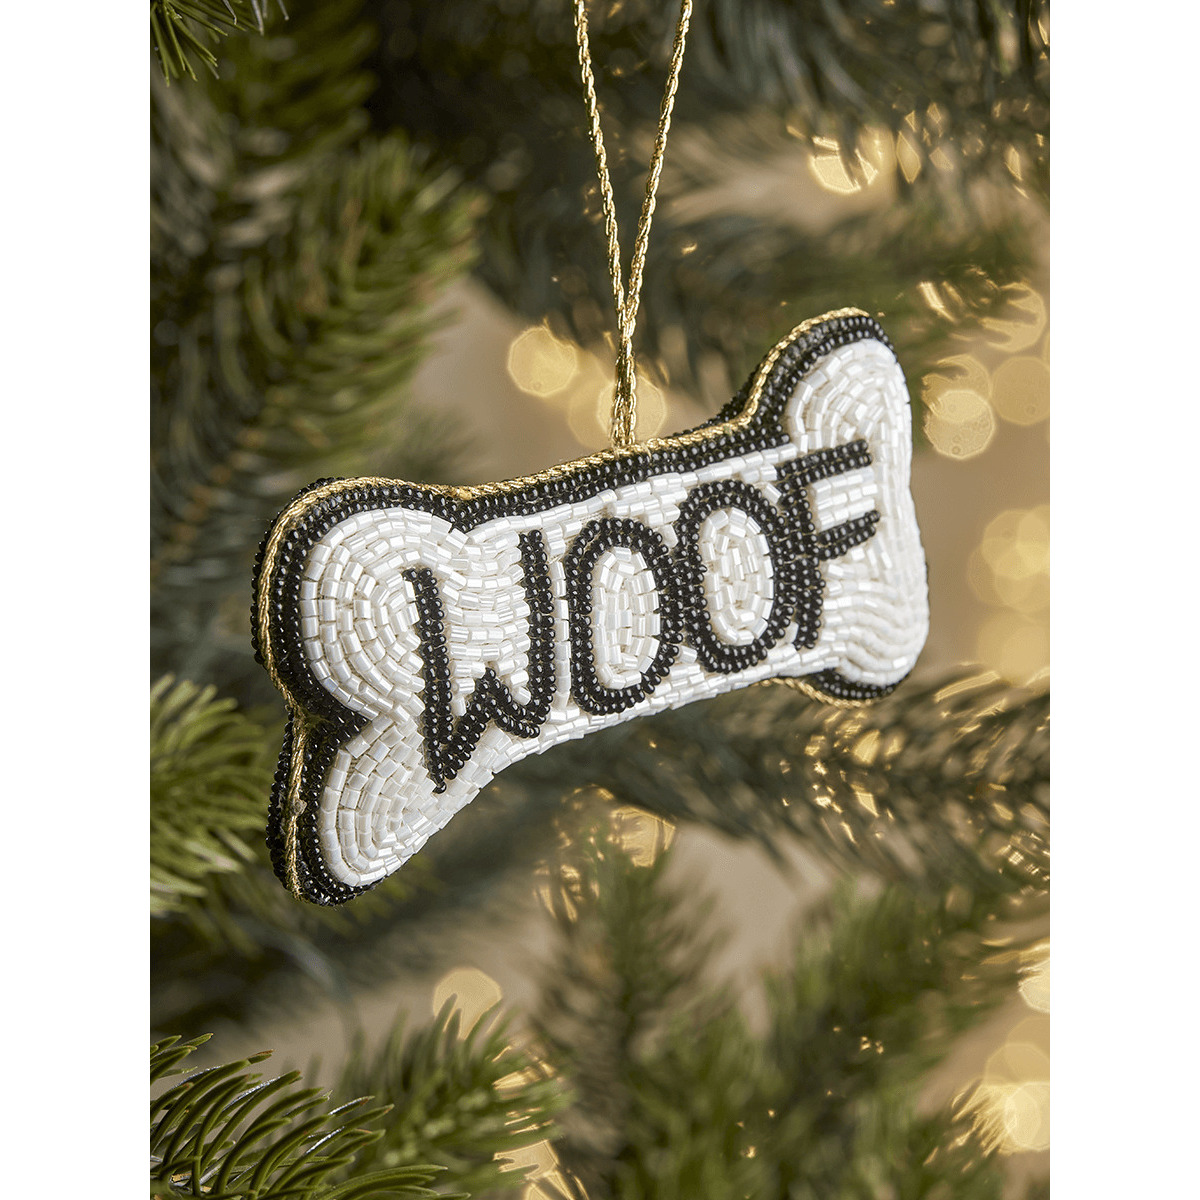 Beaded Woof Bauble - image 1